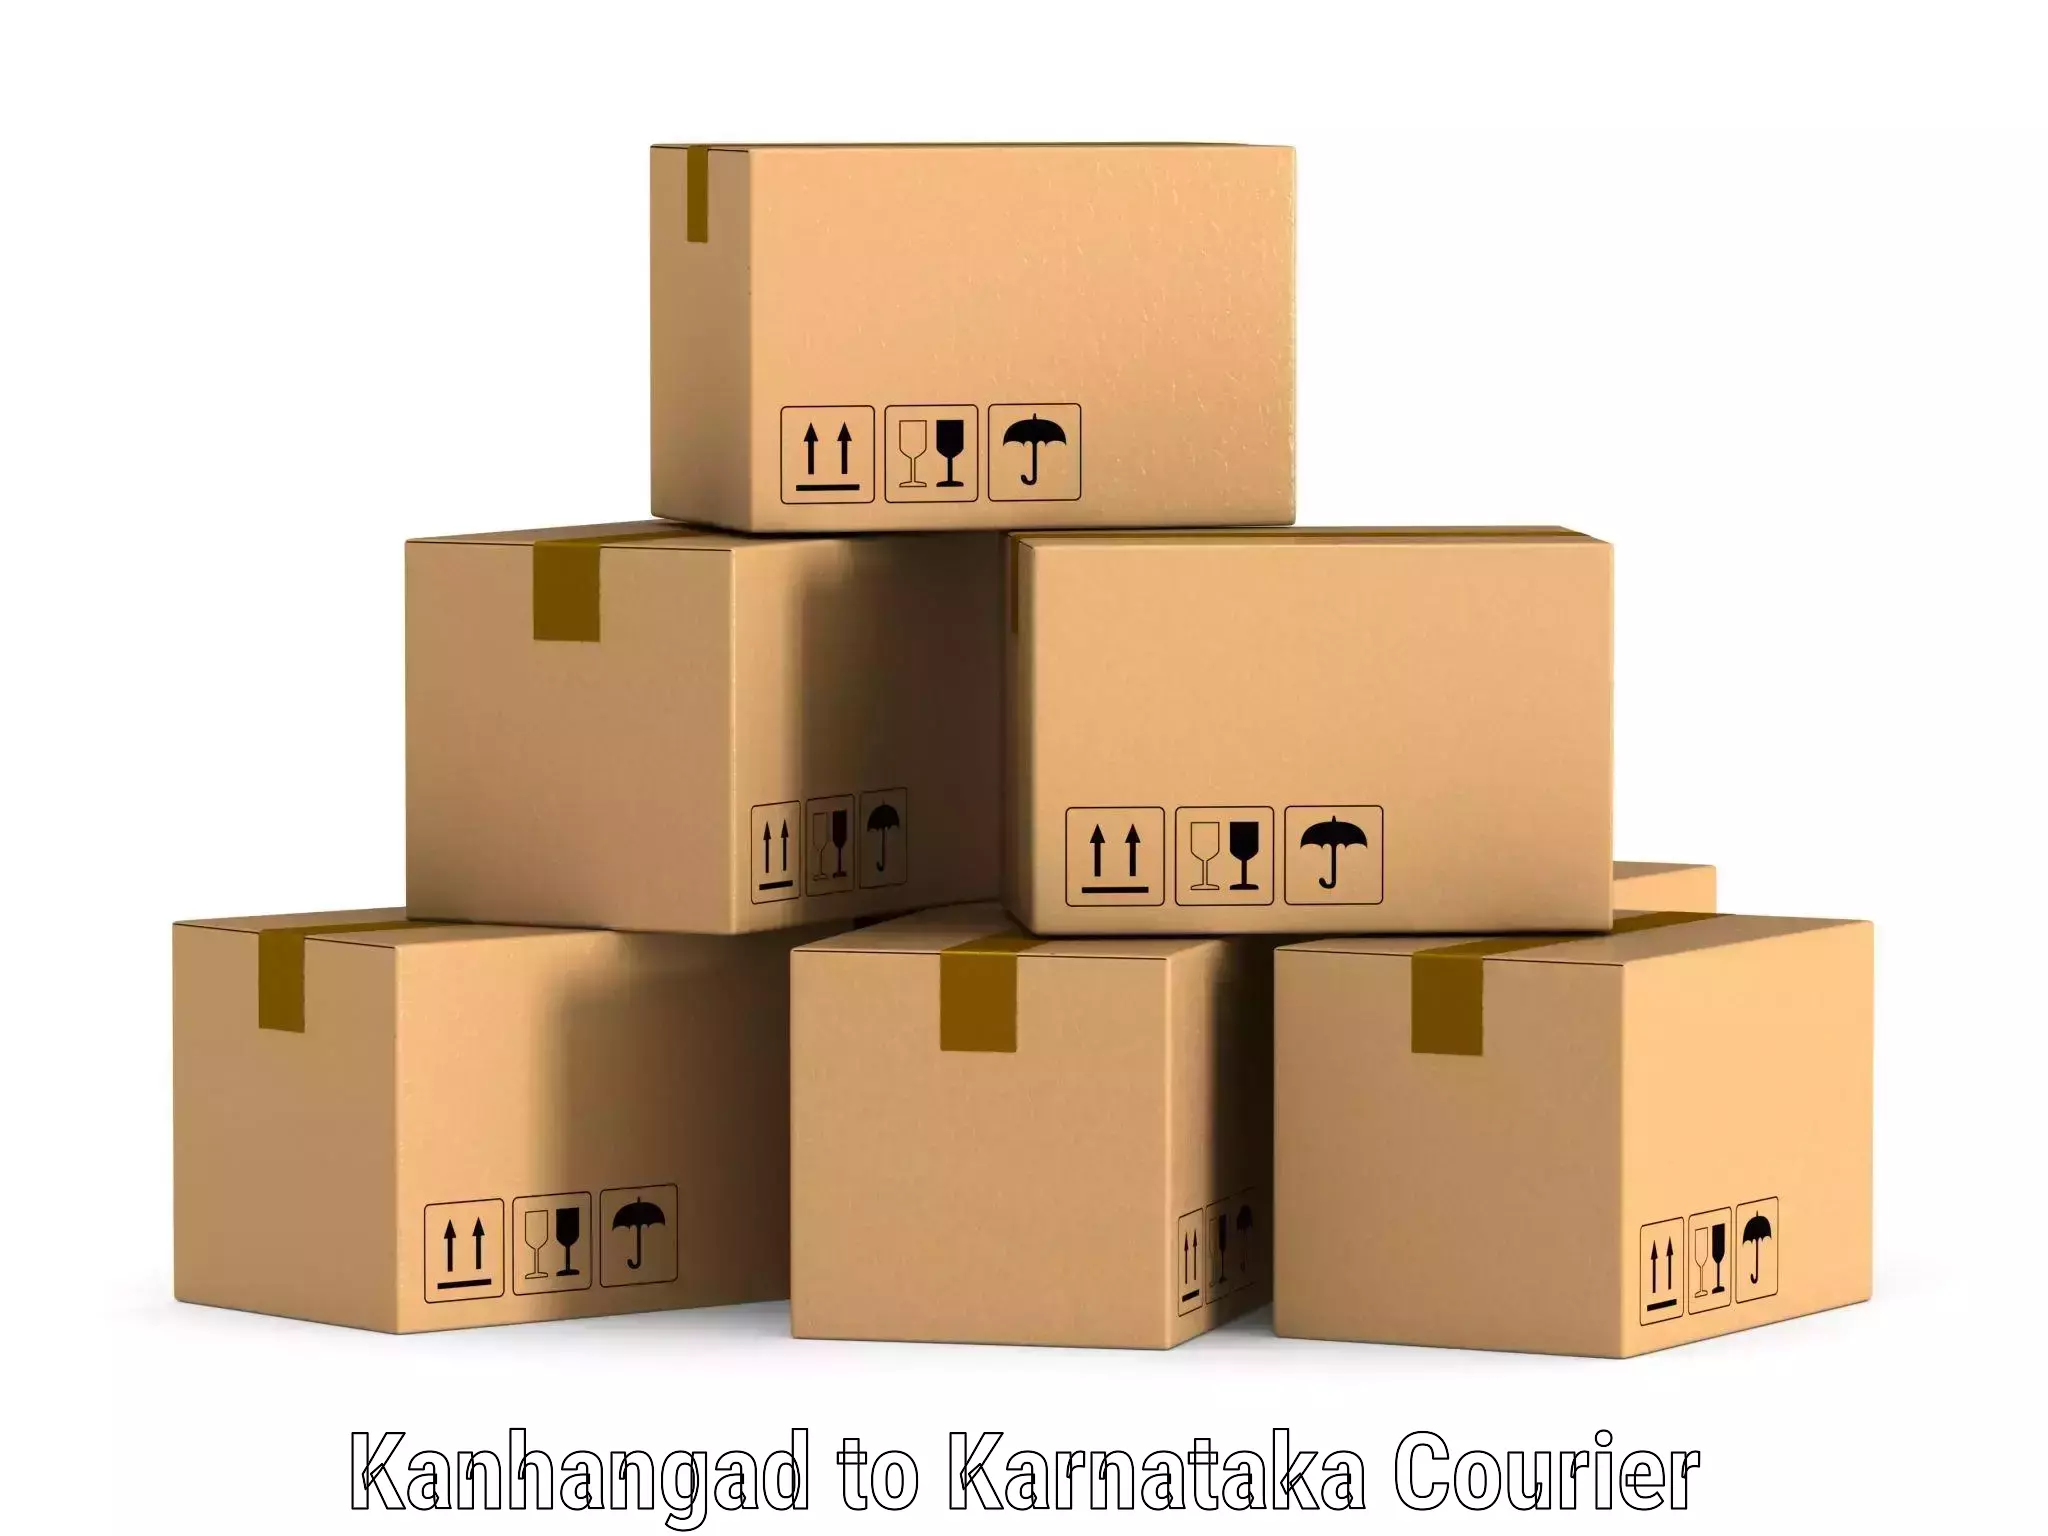 On-call courier service Kanhangad to Mangalore Port